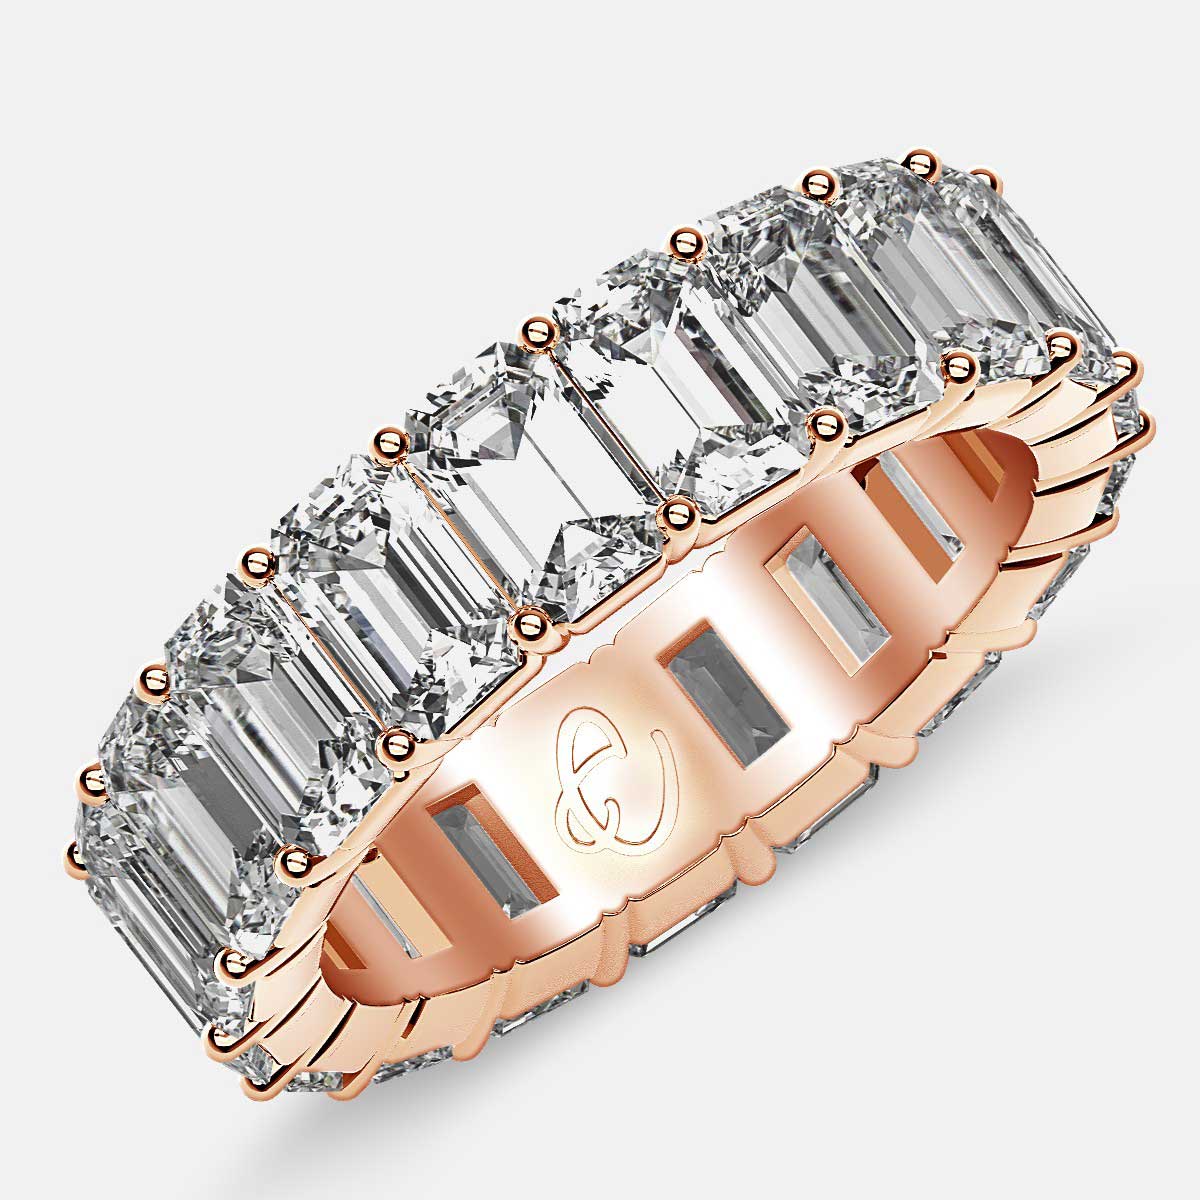 Classic Eternity Ring with Emerald Cut Diamonds in 18k Rose Gold